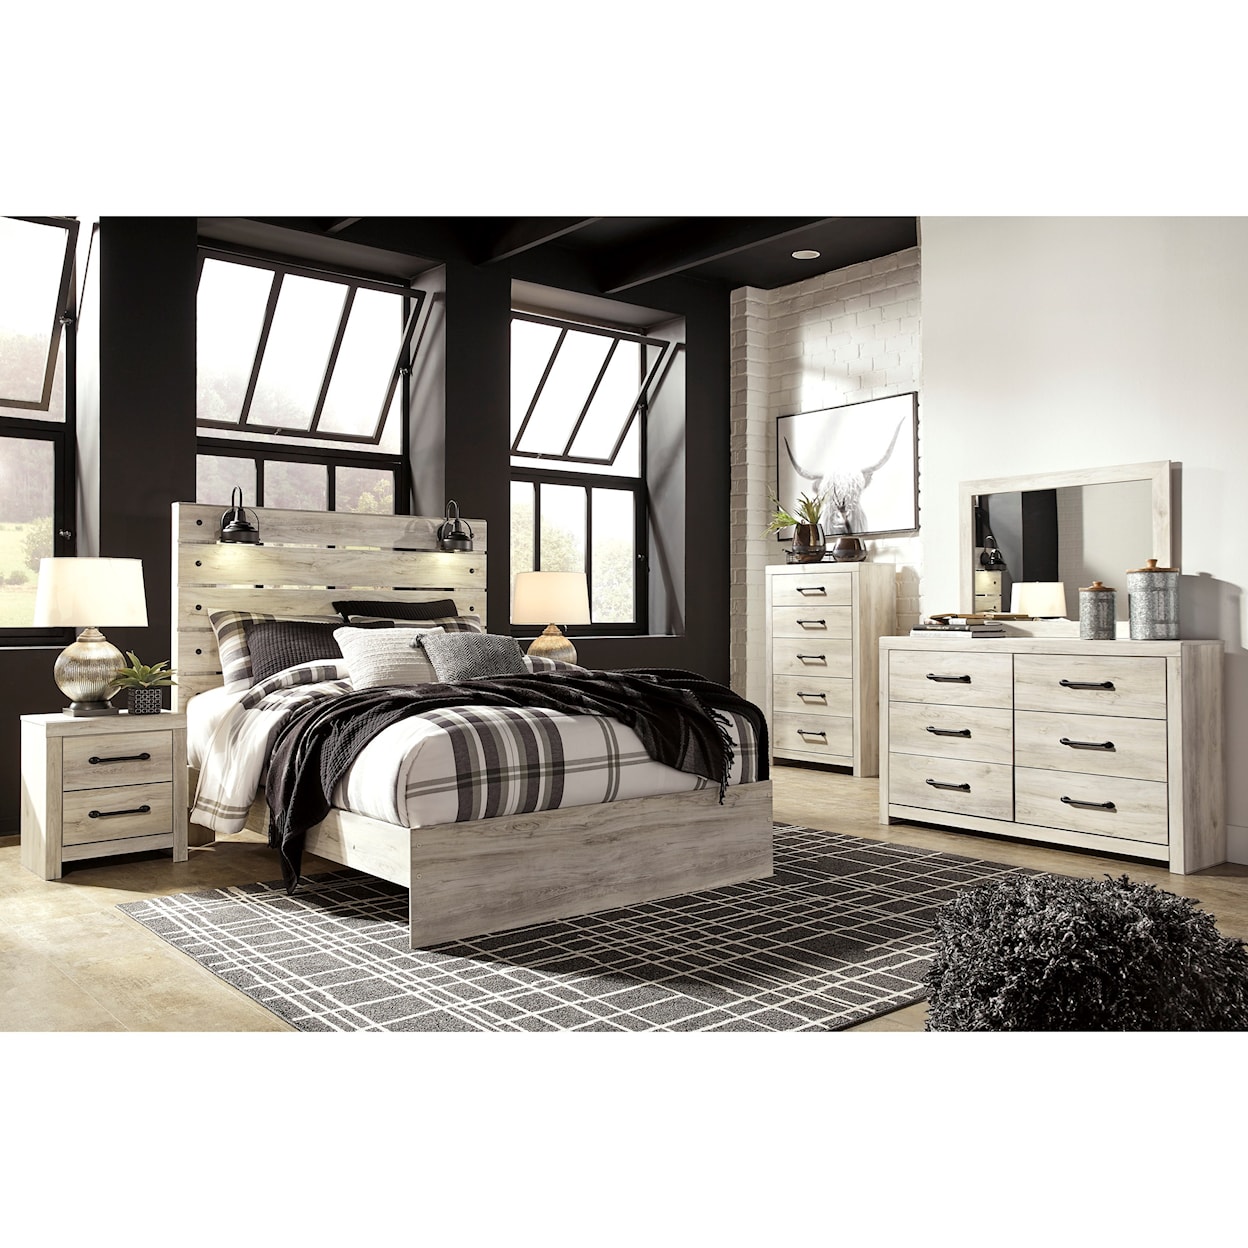 Signature Design by Ashley Drystan Queen 5-PC Bedroom Group